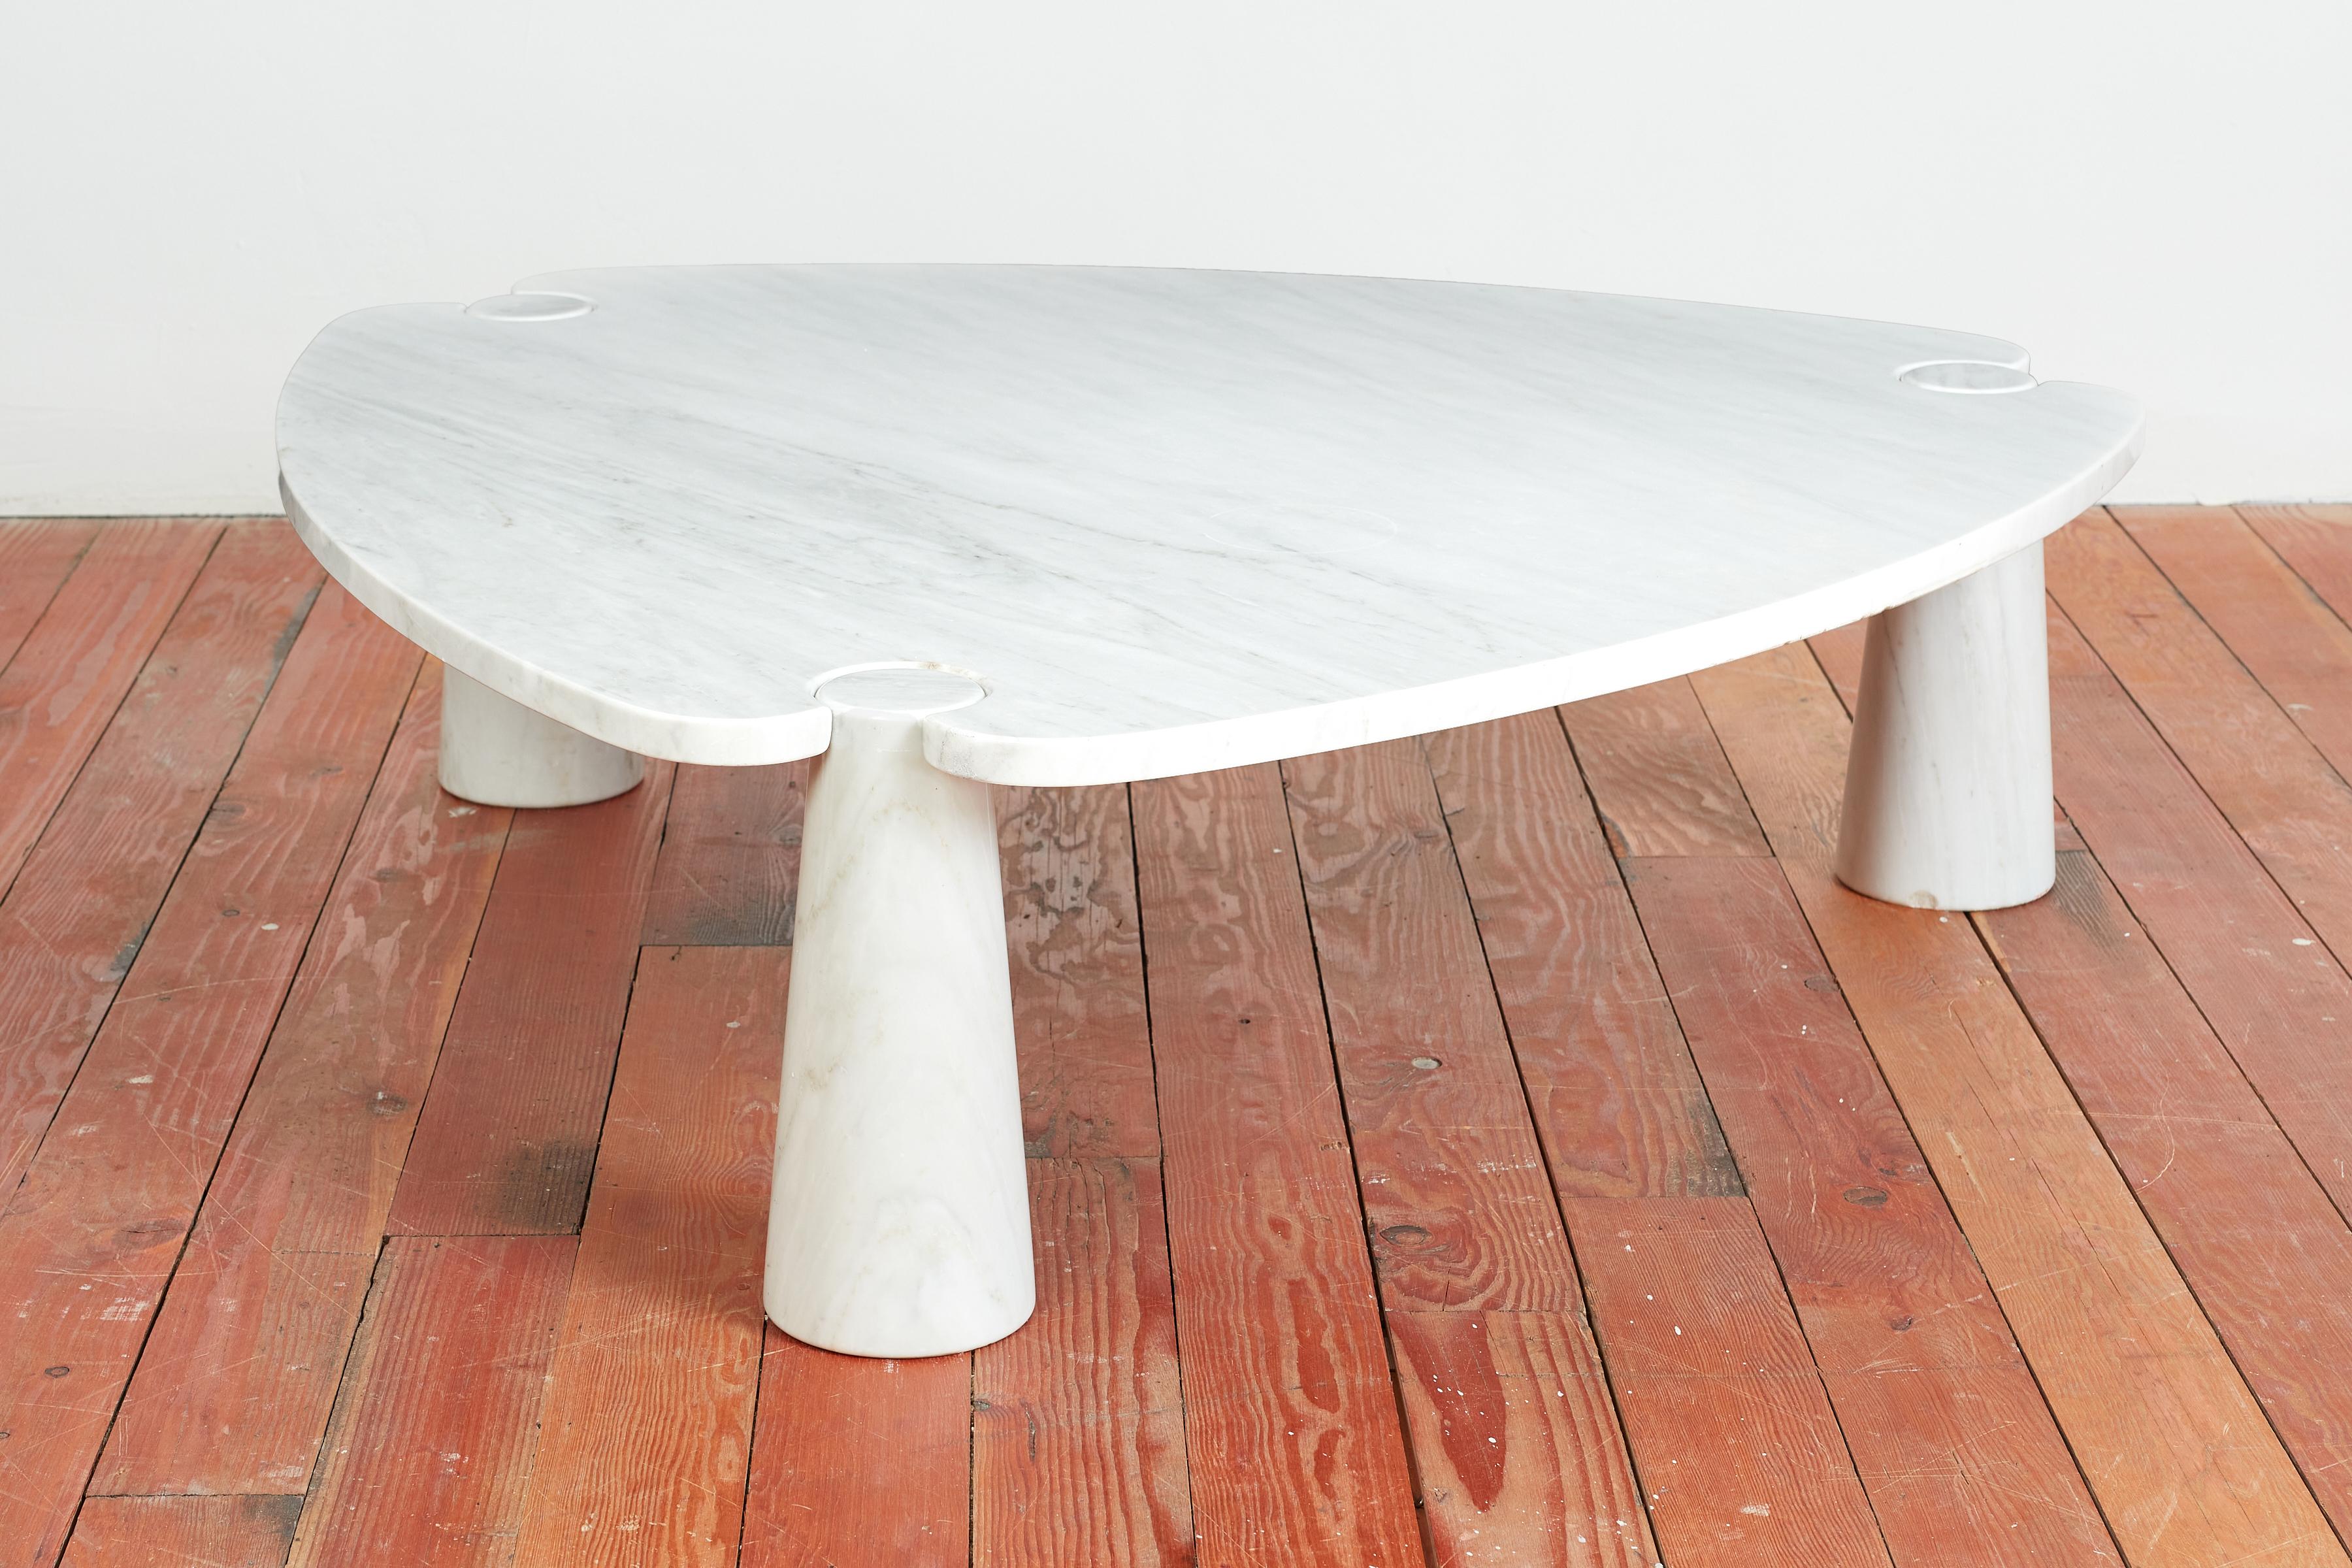 Rare triangular shaped Angelo Mangiarotti coffee table in white Carrara marble. 
Extremely large size - 53